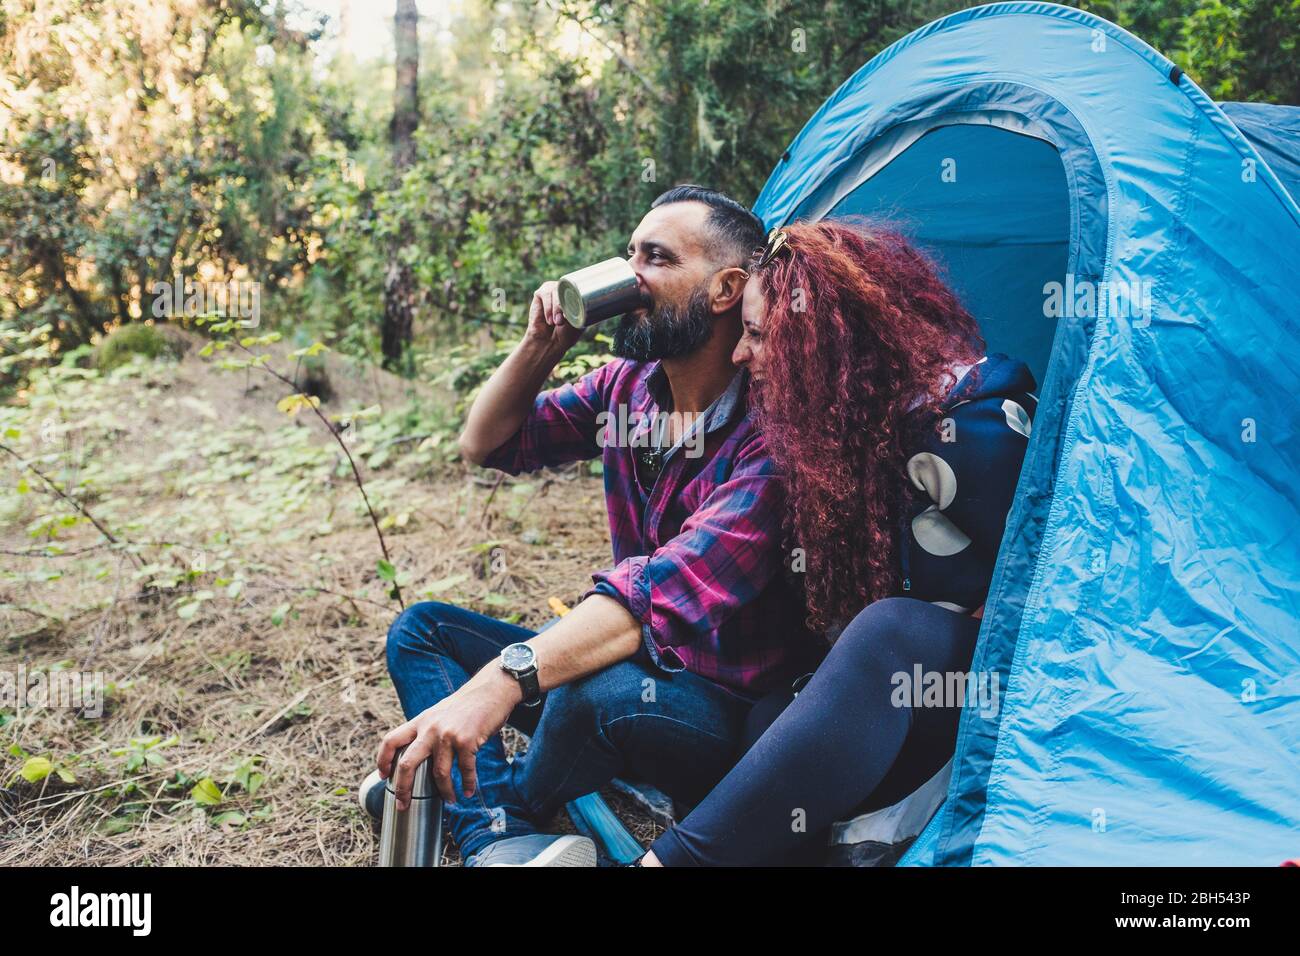 Smiling couple drinking by tent Stock Photo